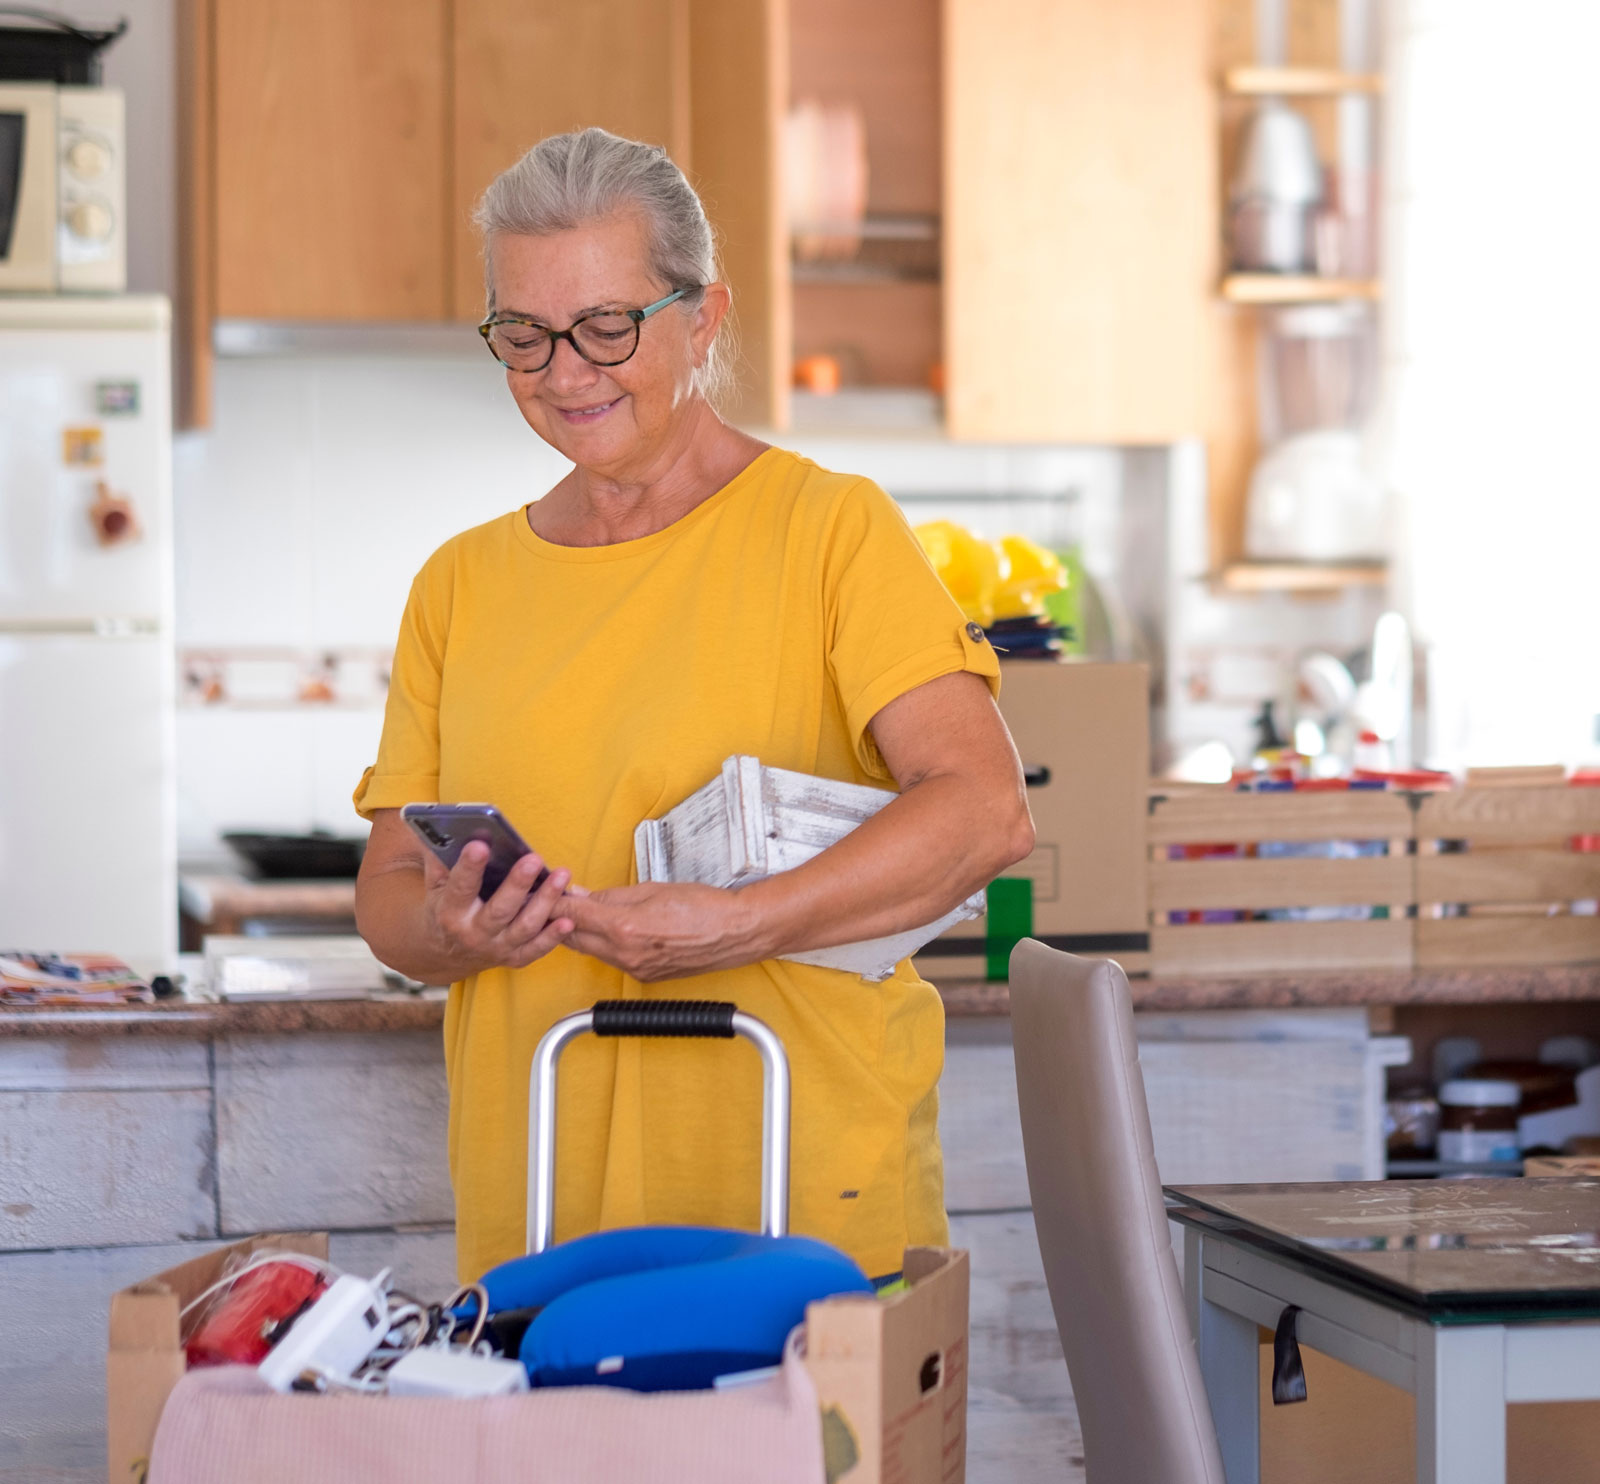 Senior woman looking at smart phone during preparation of relocation with a white small basket under the arm - lot of moving boxes and things in the kitchen